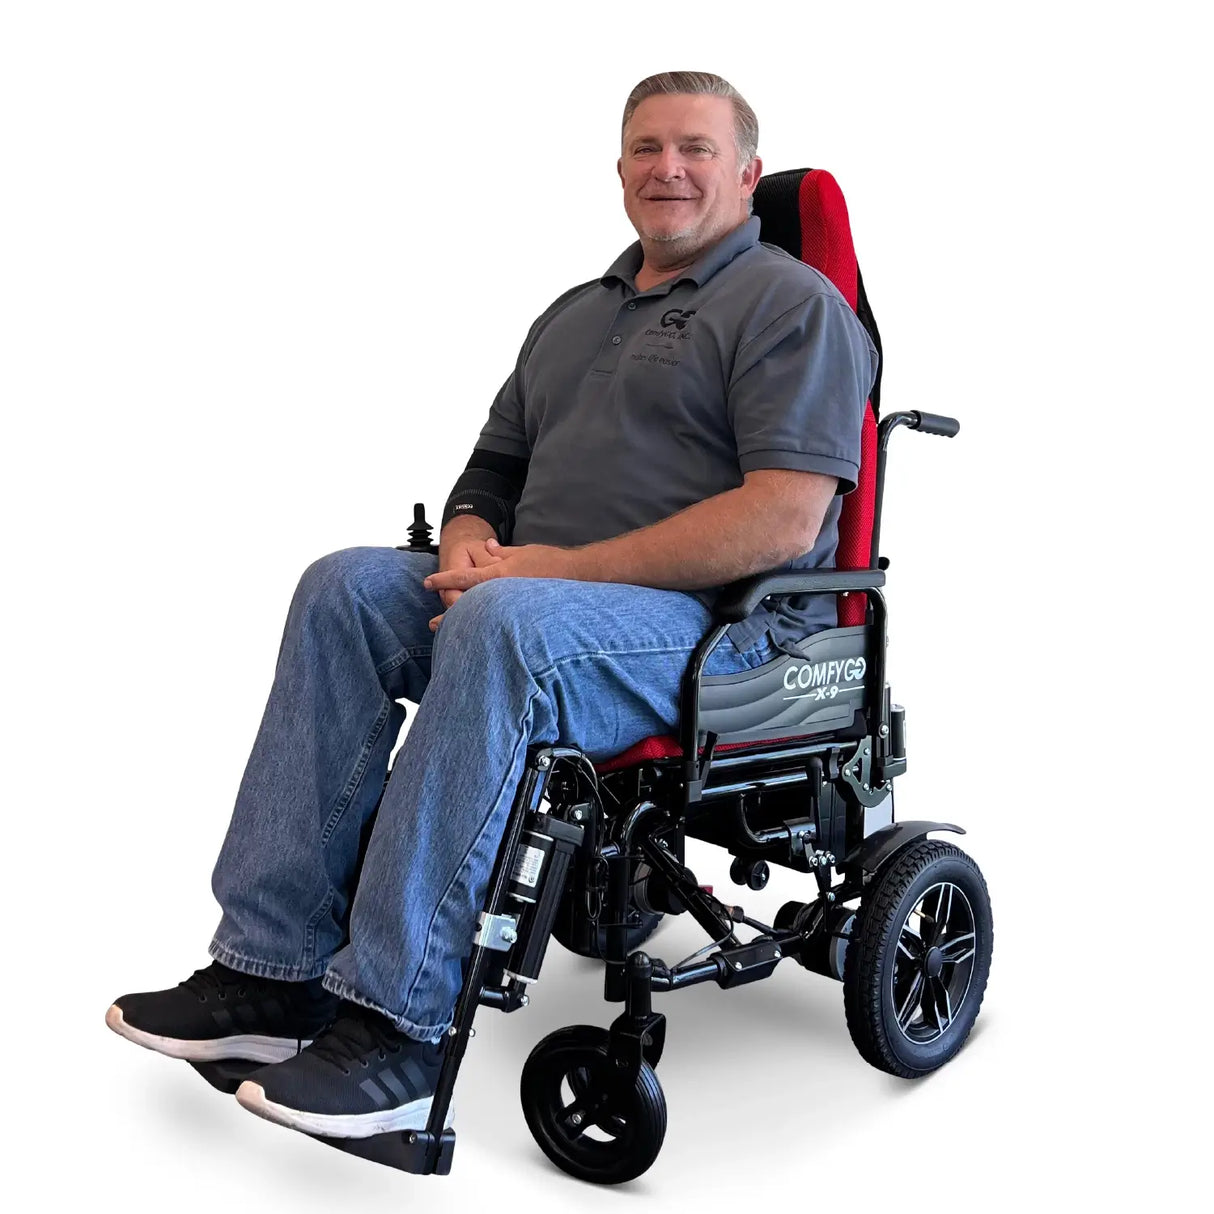 ComfyGo X-9 Remote Controlled Electric Power Wheelchair with Automatic Recline